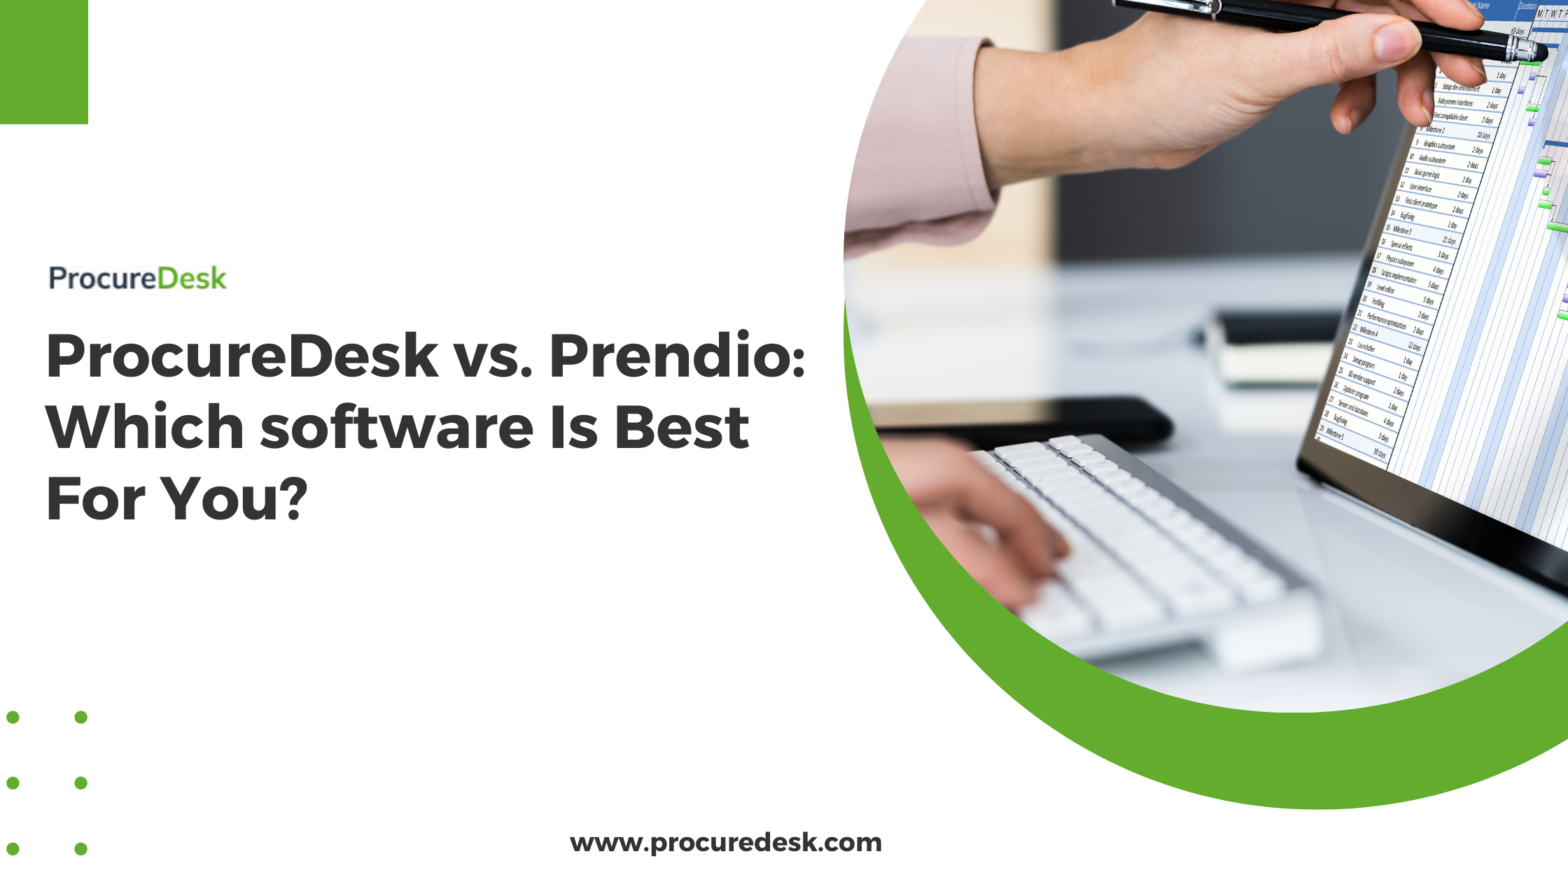 ProcureDesk Vs Prendio which software is best for you